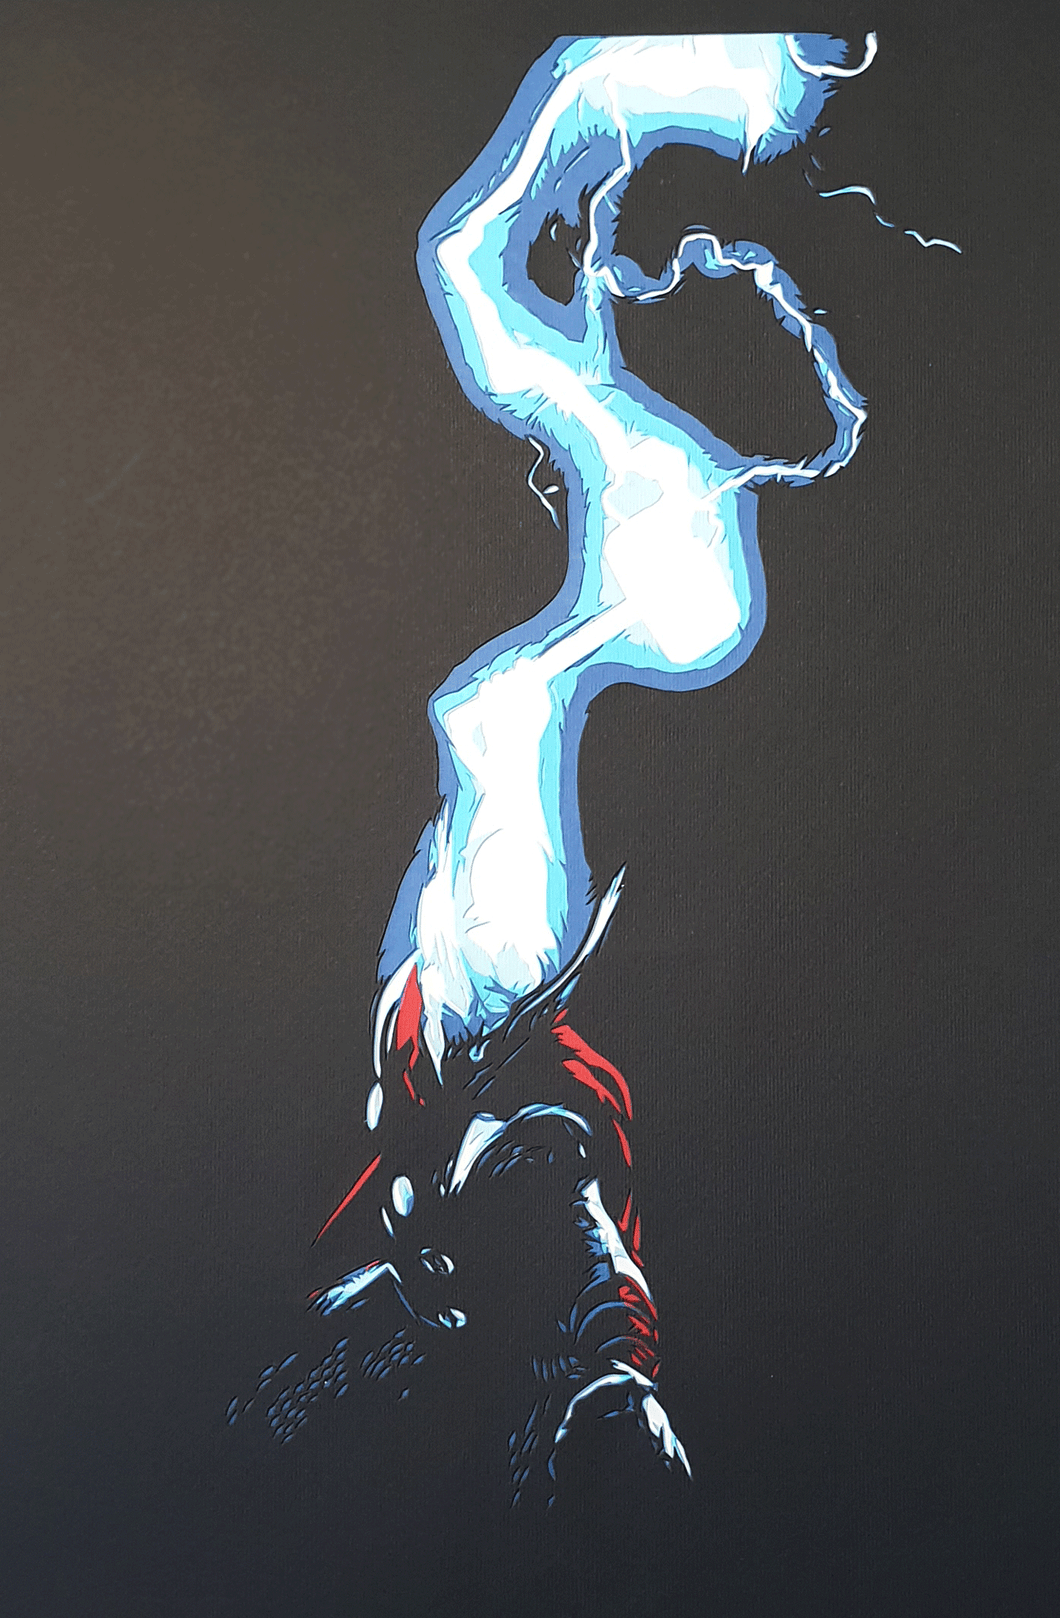 Thor - God Of Thunder by Rick Sharif [A3 Size (297 x 420 mm) (11.7 x 16.5 in)]